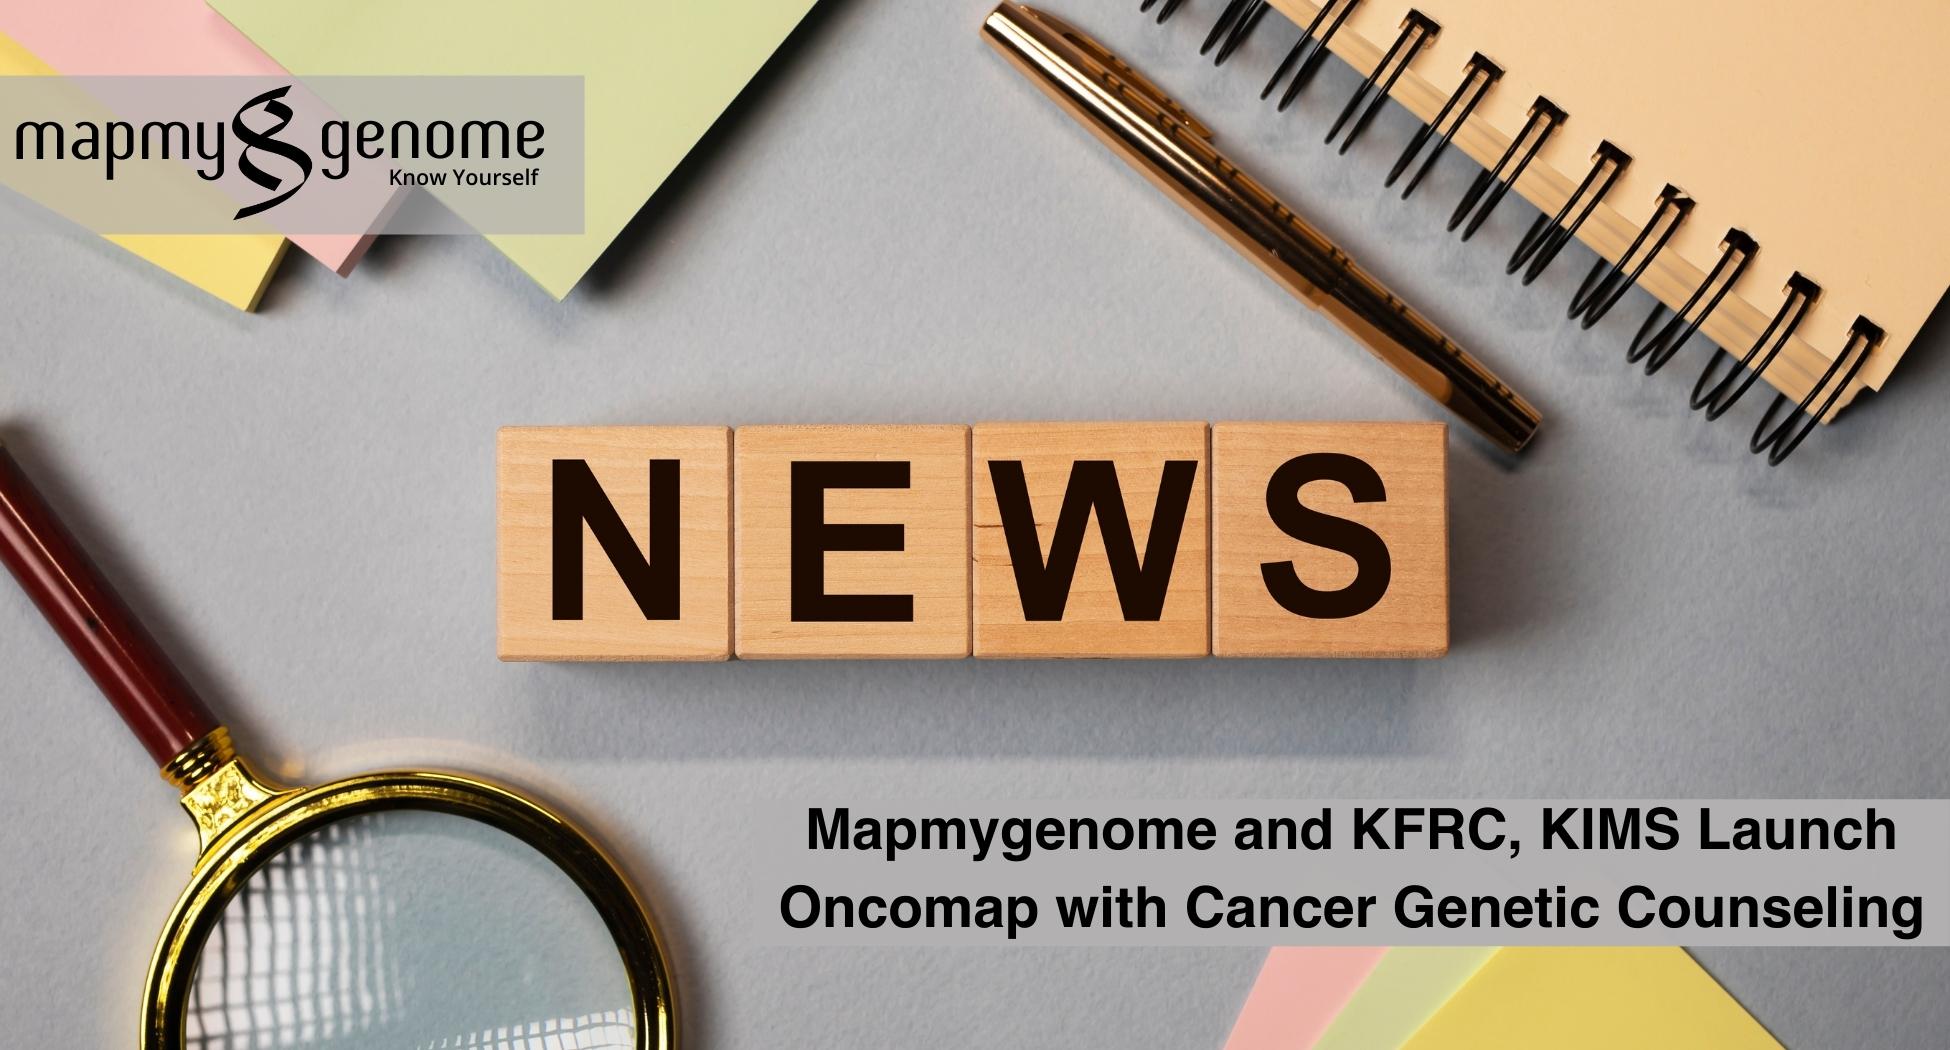 Mapmygenome and KFRC, KIMS Launch Oncomap with Cancer Genetic Counseling